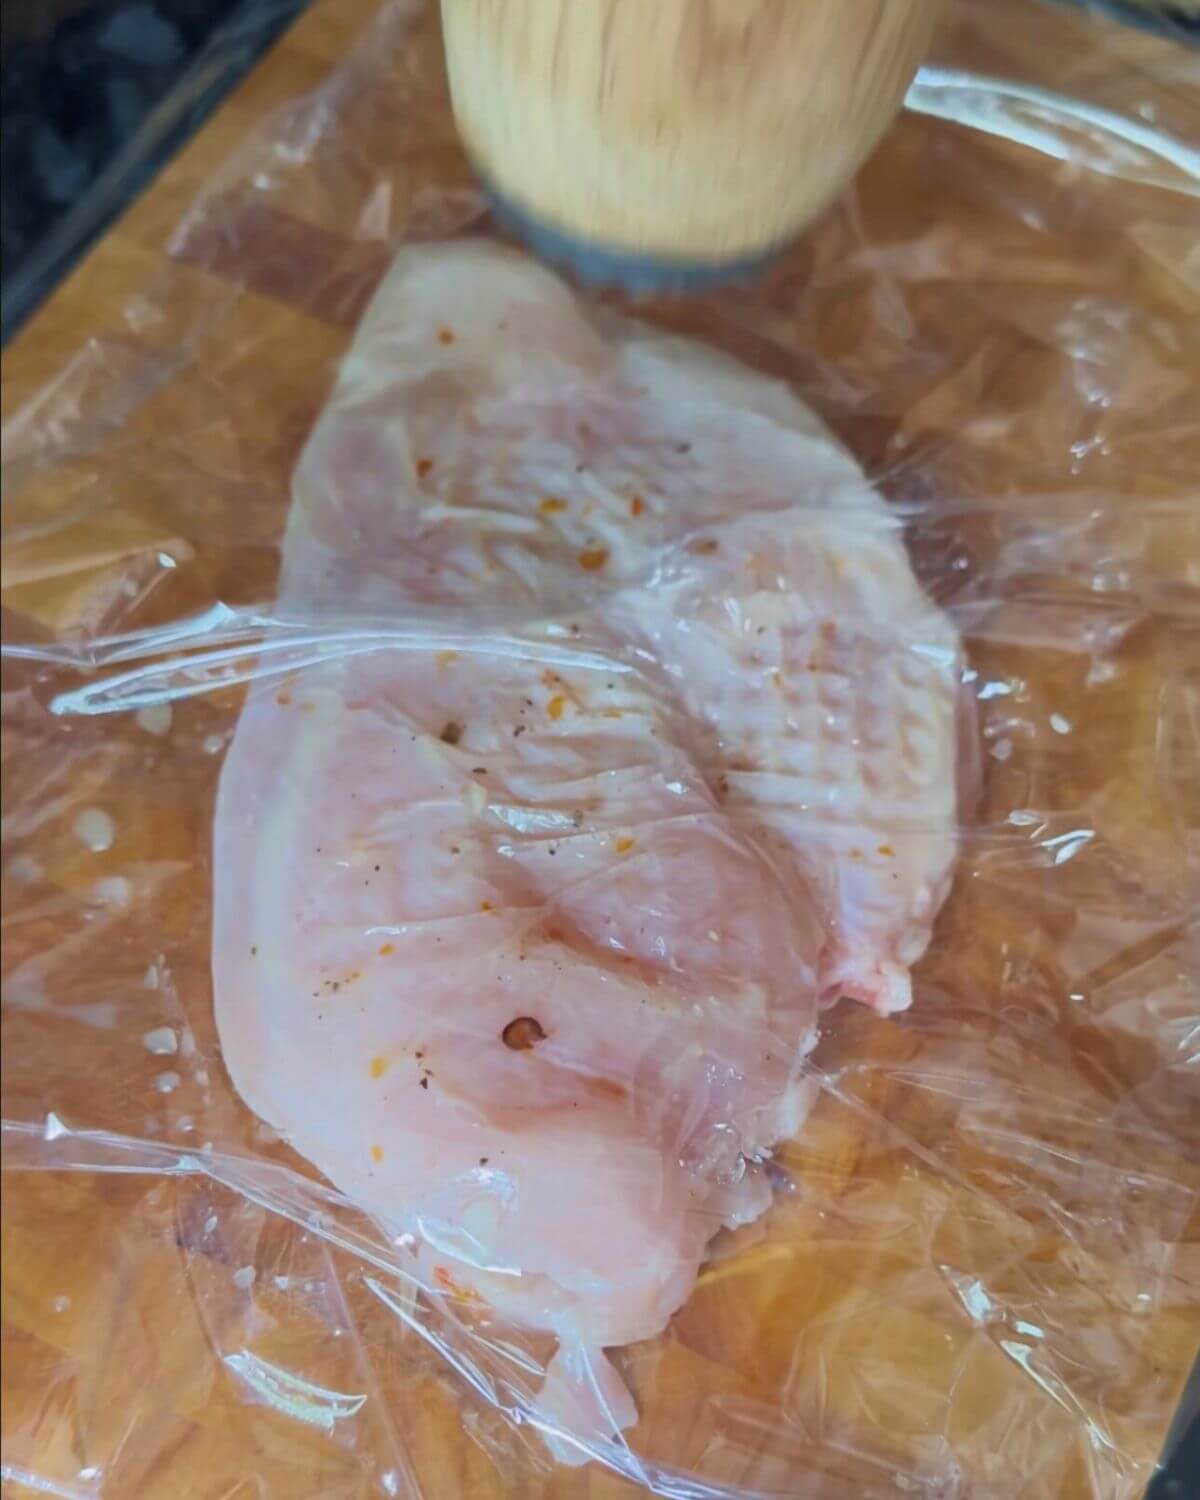 A photo showing a chicken breast wrapped in clingfilm ready to be tenderised.